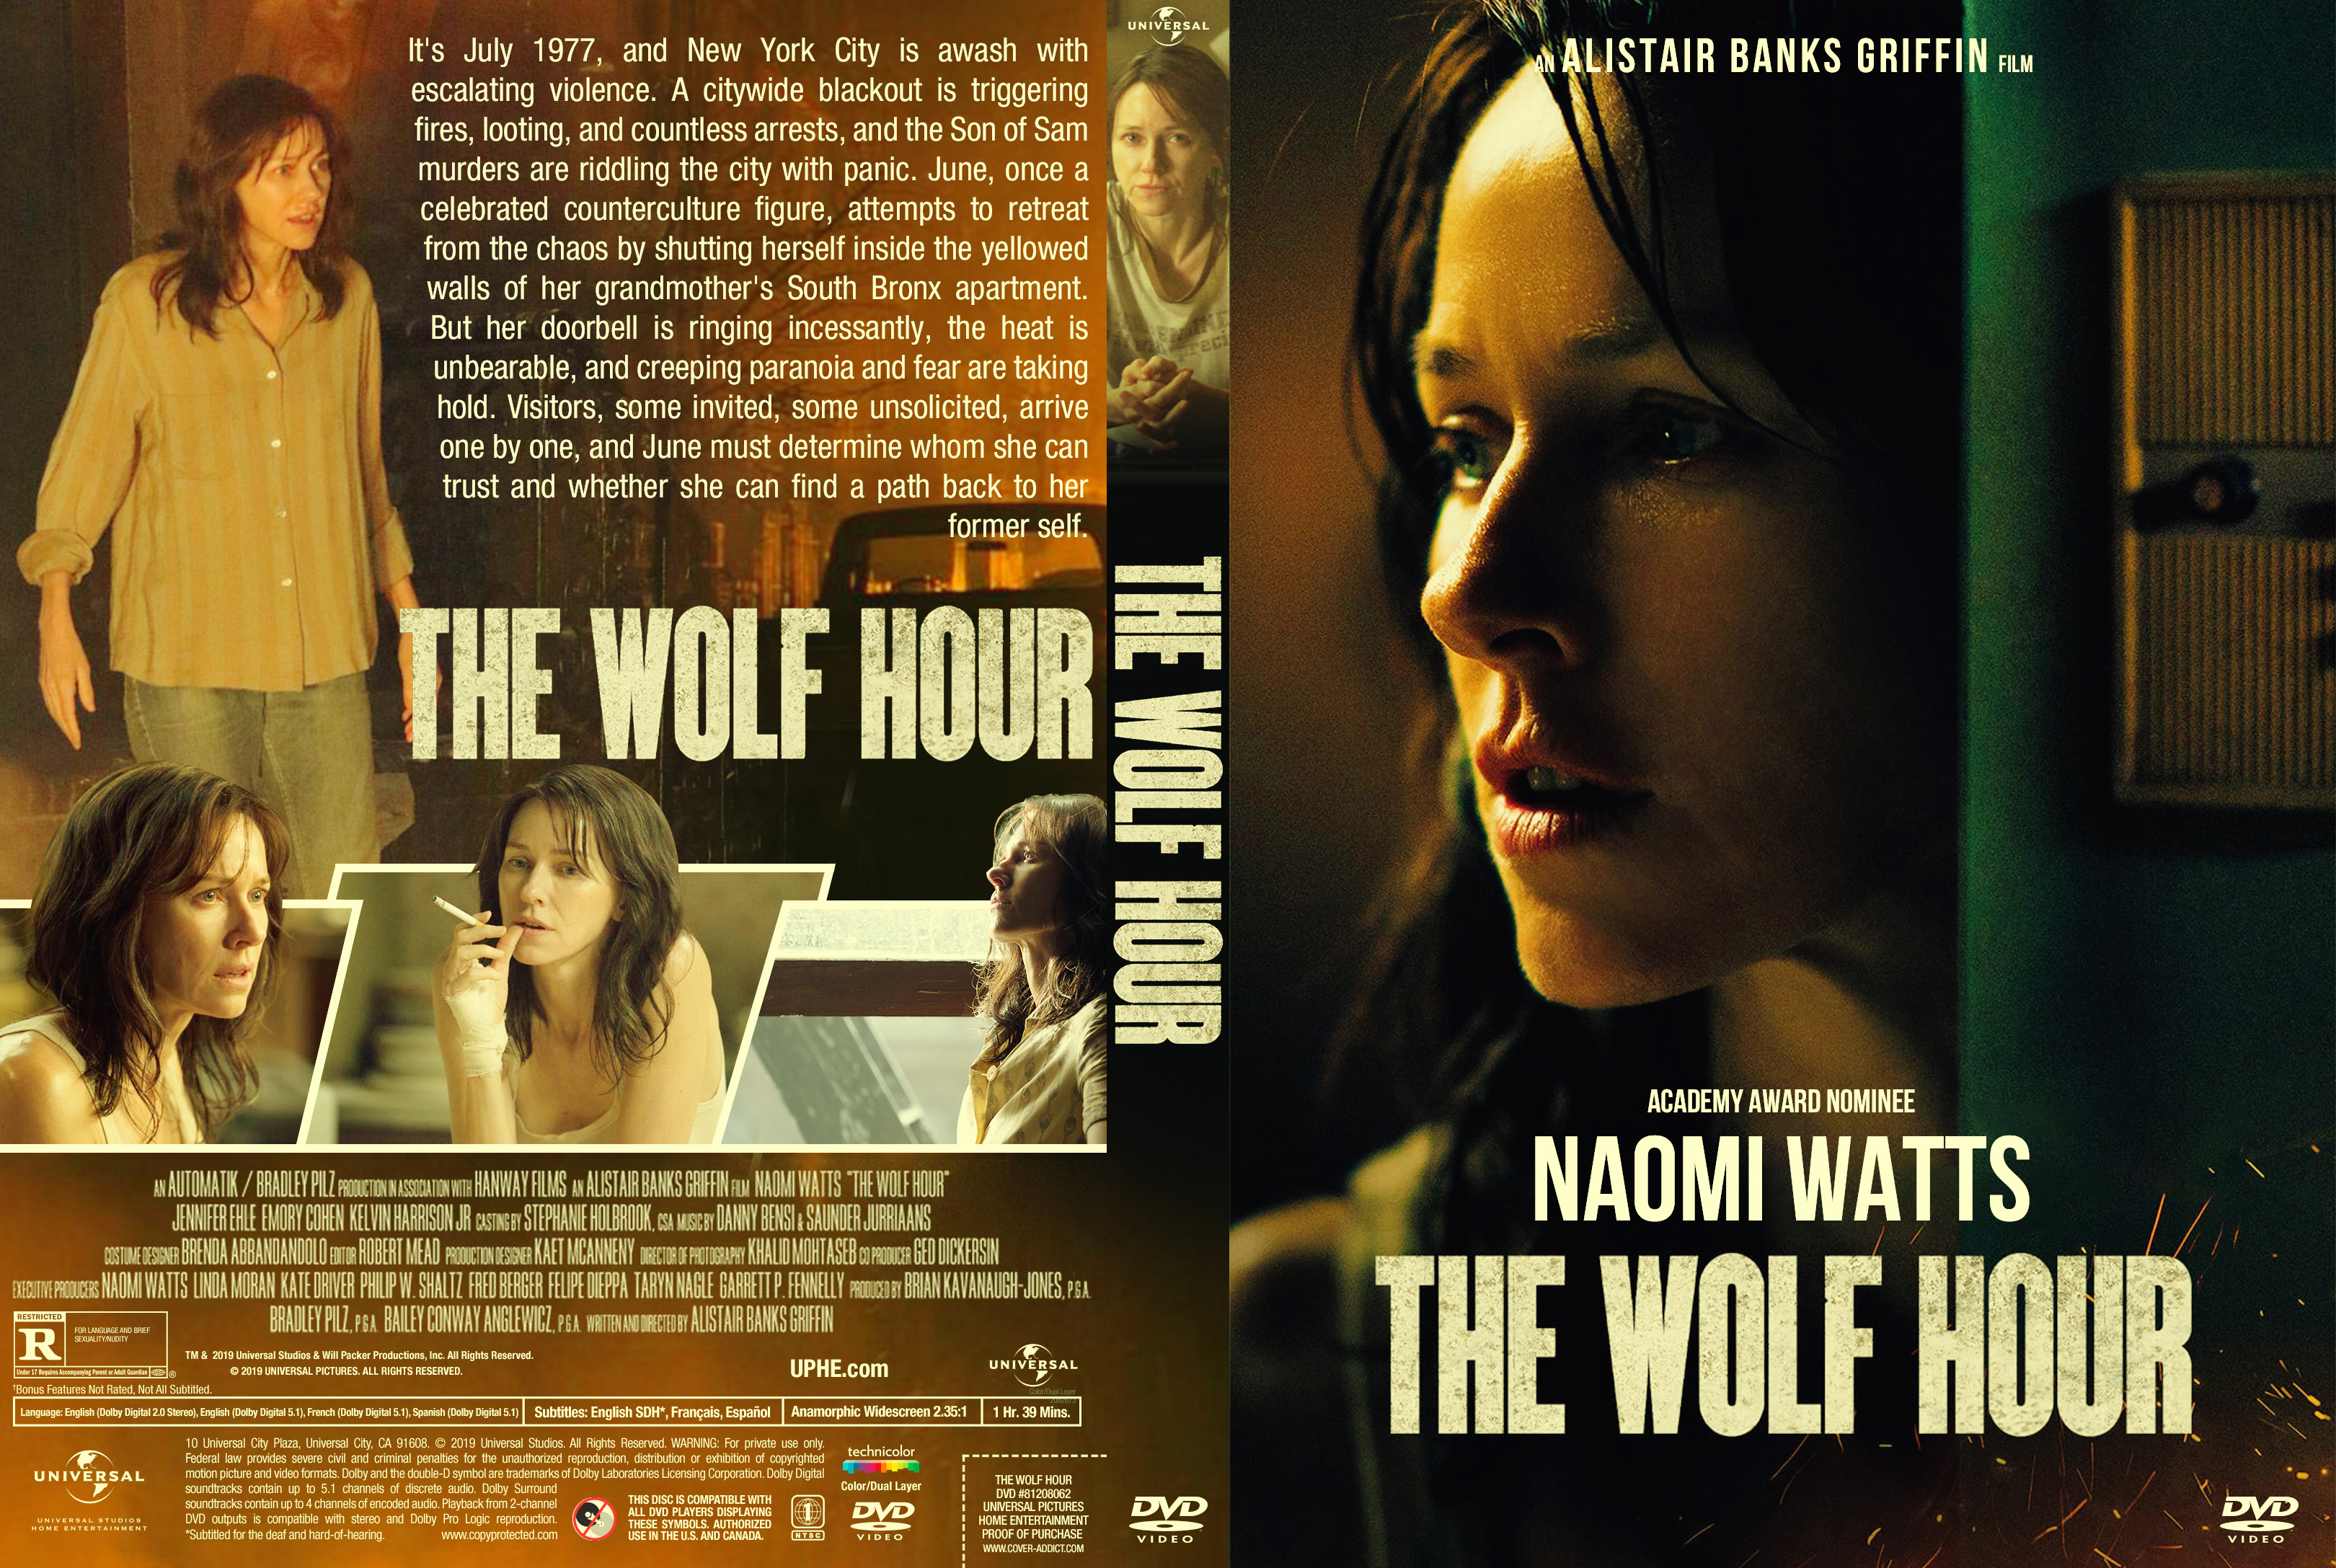 The Wolf Hour DVD Cover | Cover Addict - Free DVD, Bluray ...